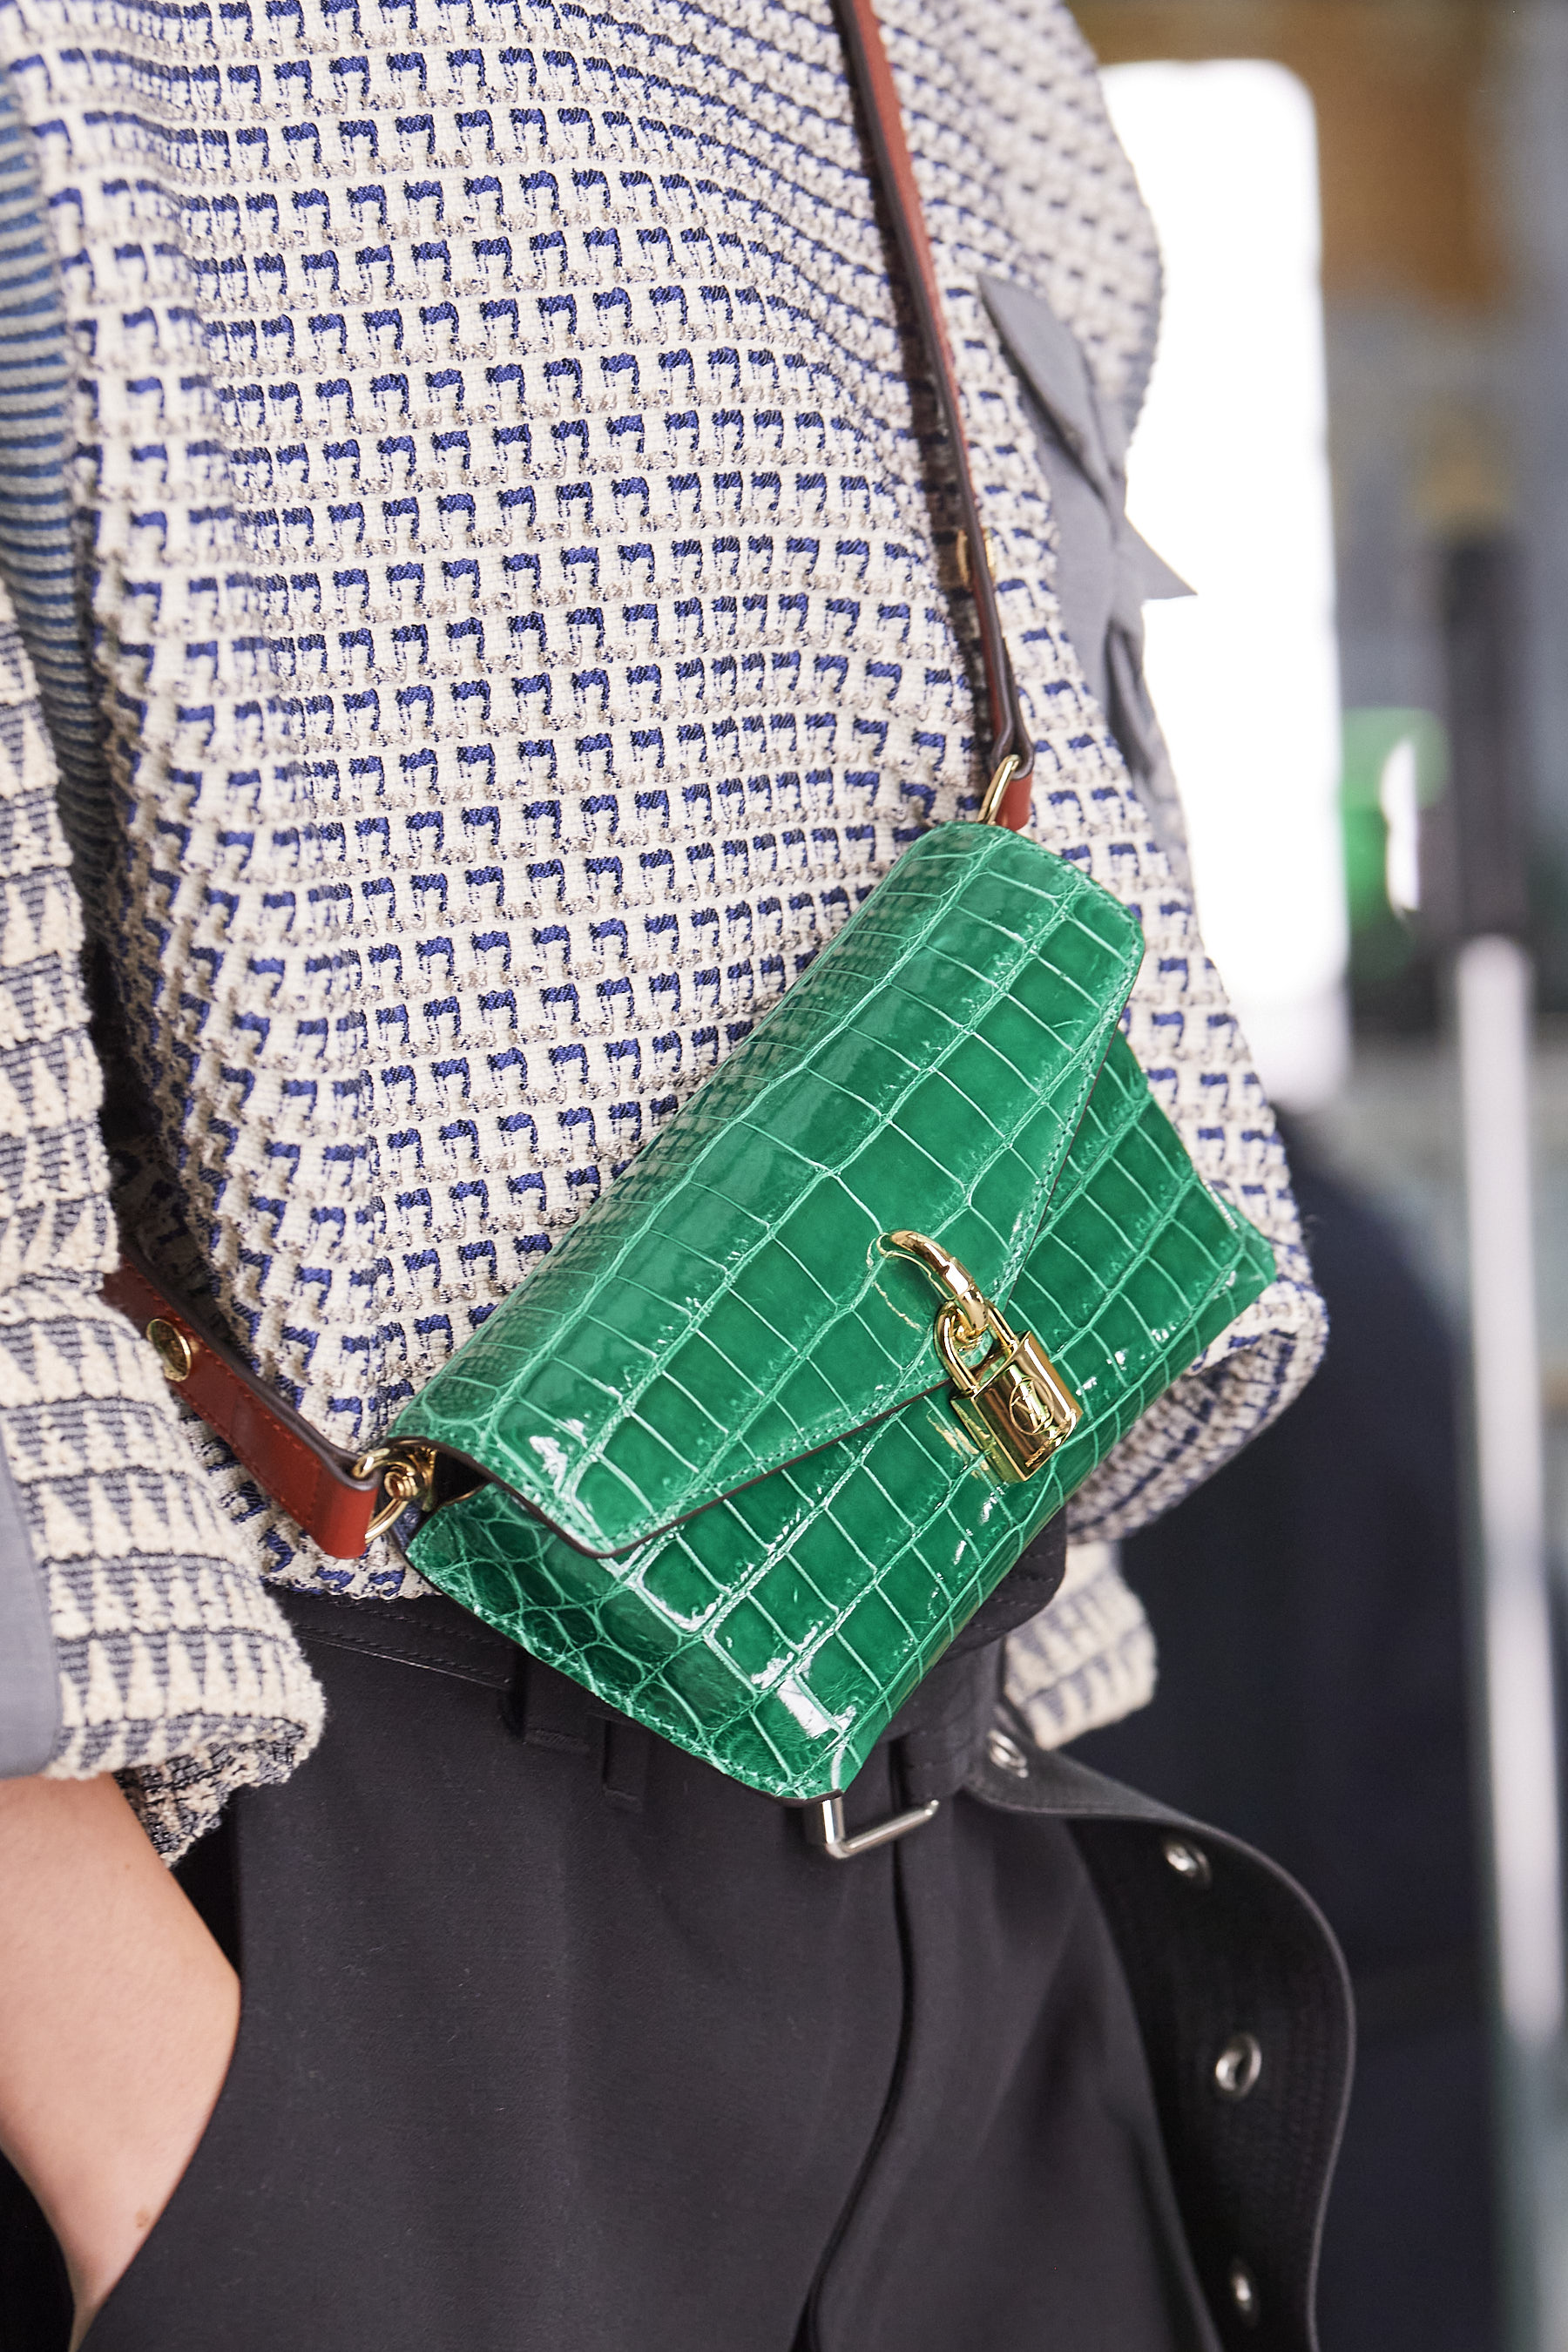 The best Bag and Purse trends for 2021